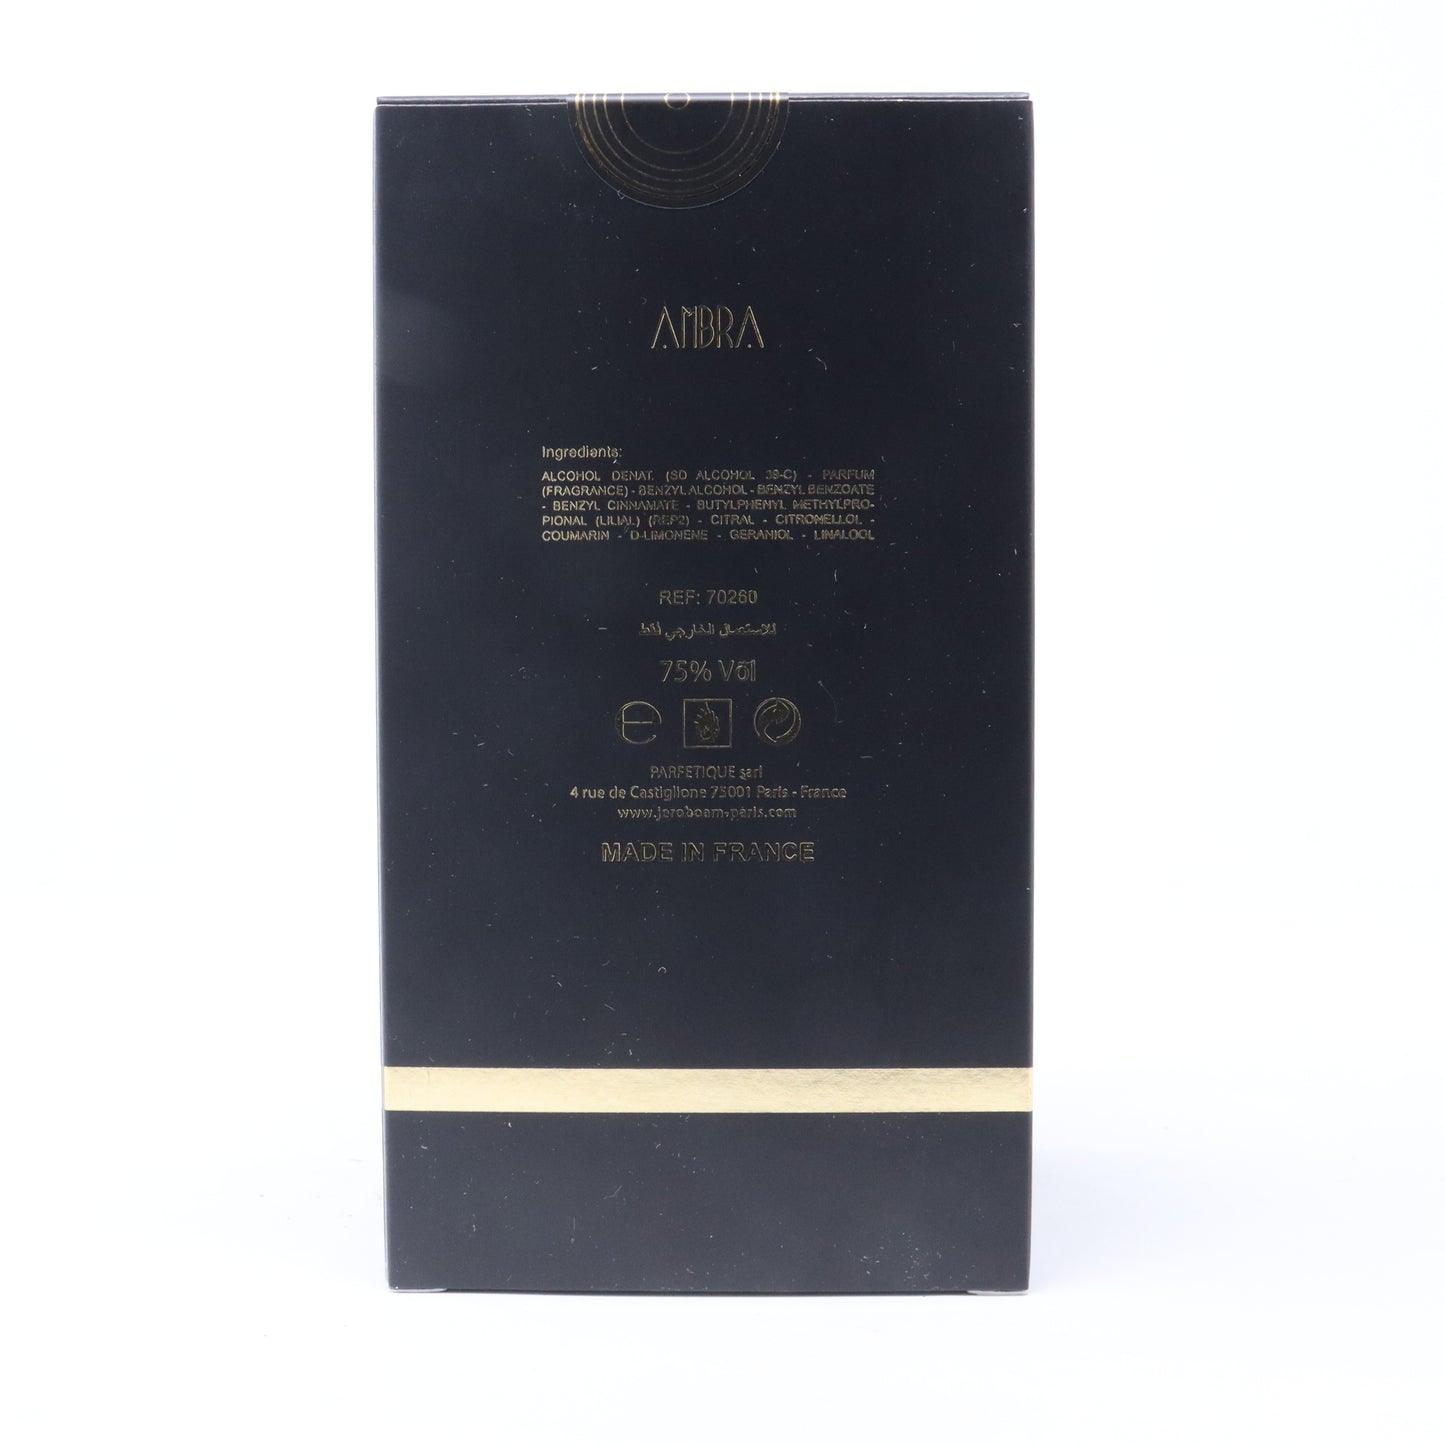 Ambra by Jeroboam Extracts 1.0oz/30ml Spray New With Box